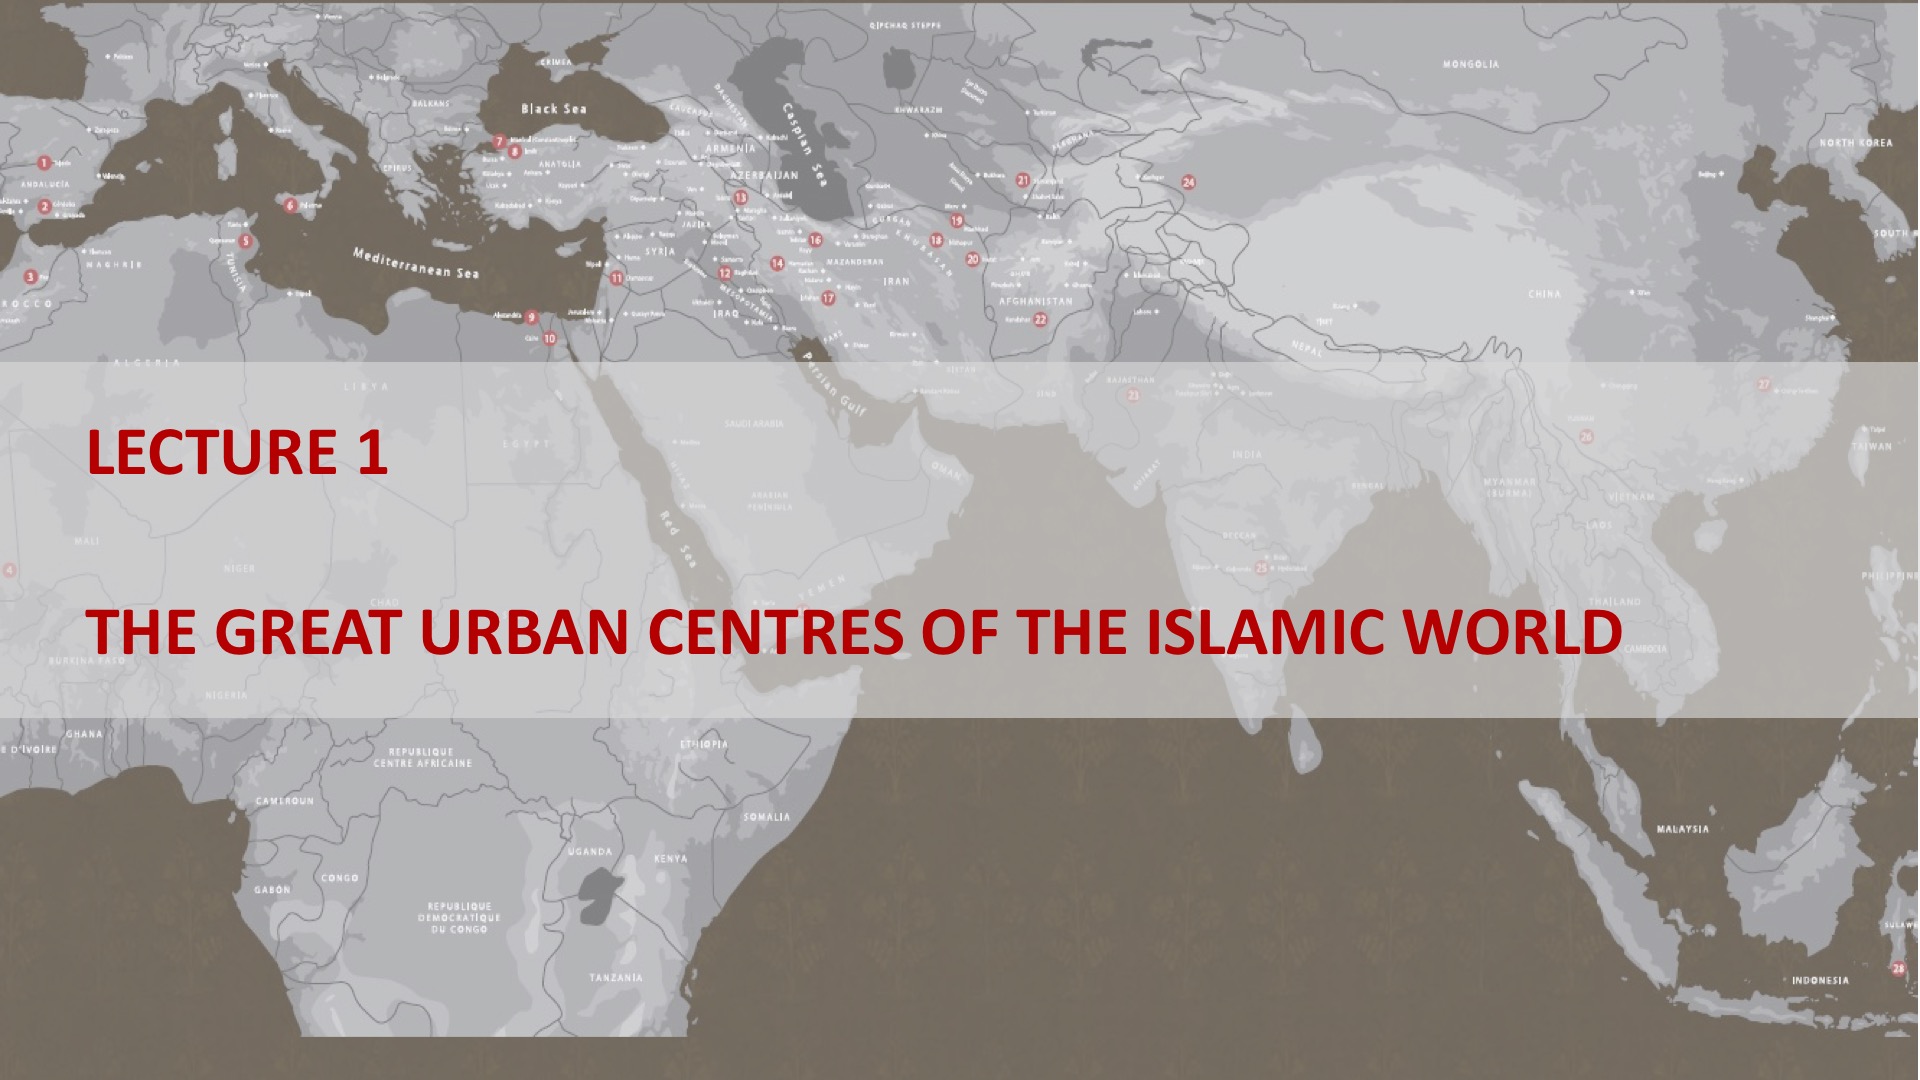 Lecture 1: The Great Urban Centres of the Islamic World